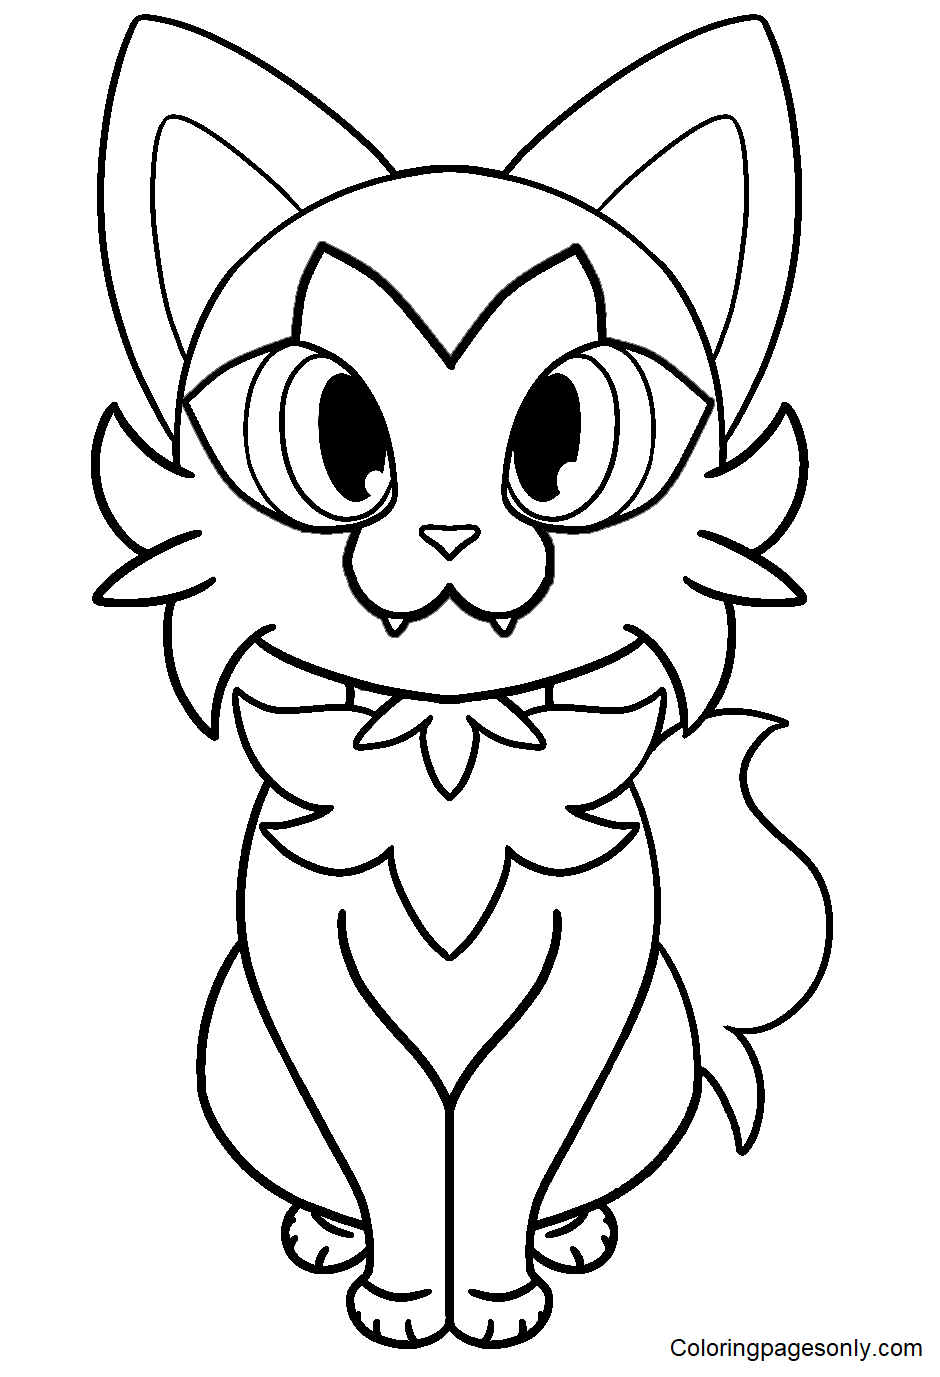 Sprigatito coloring pages printable for free download